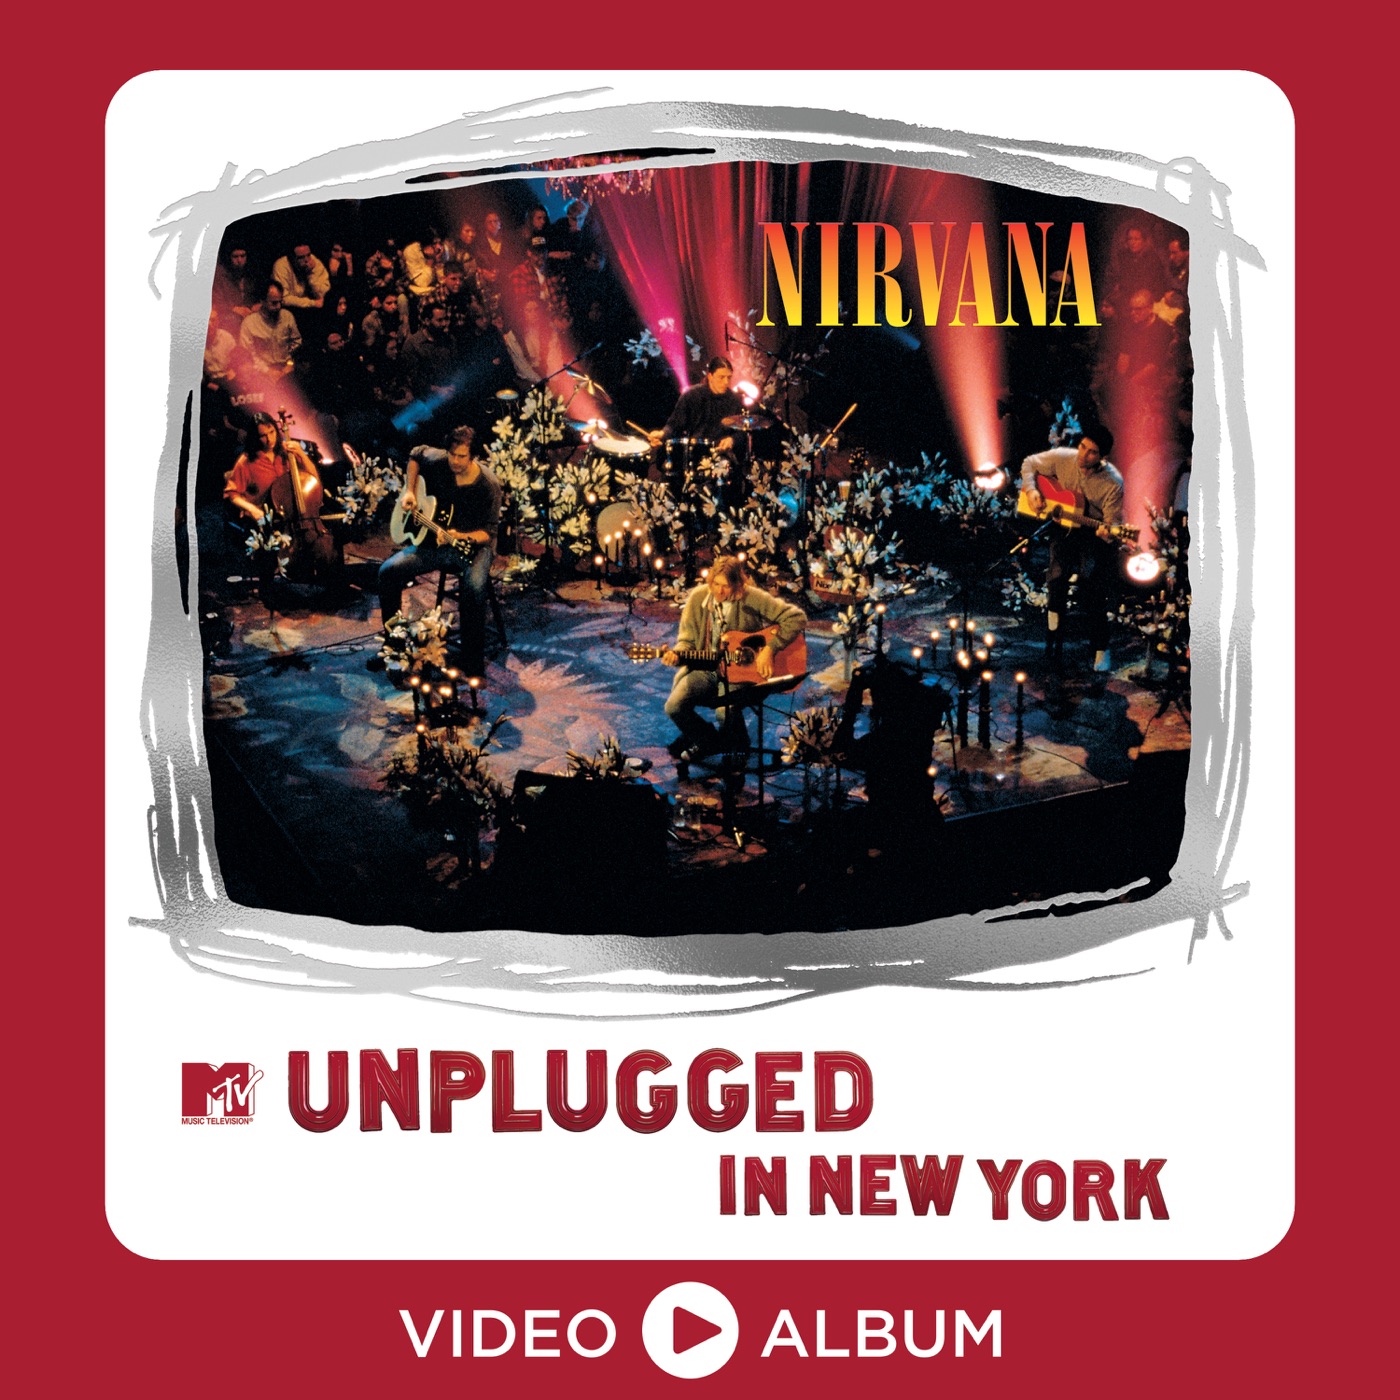 MTV Unplugged In New York by Nirvana